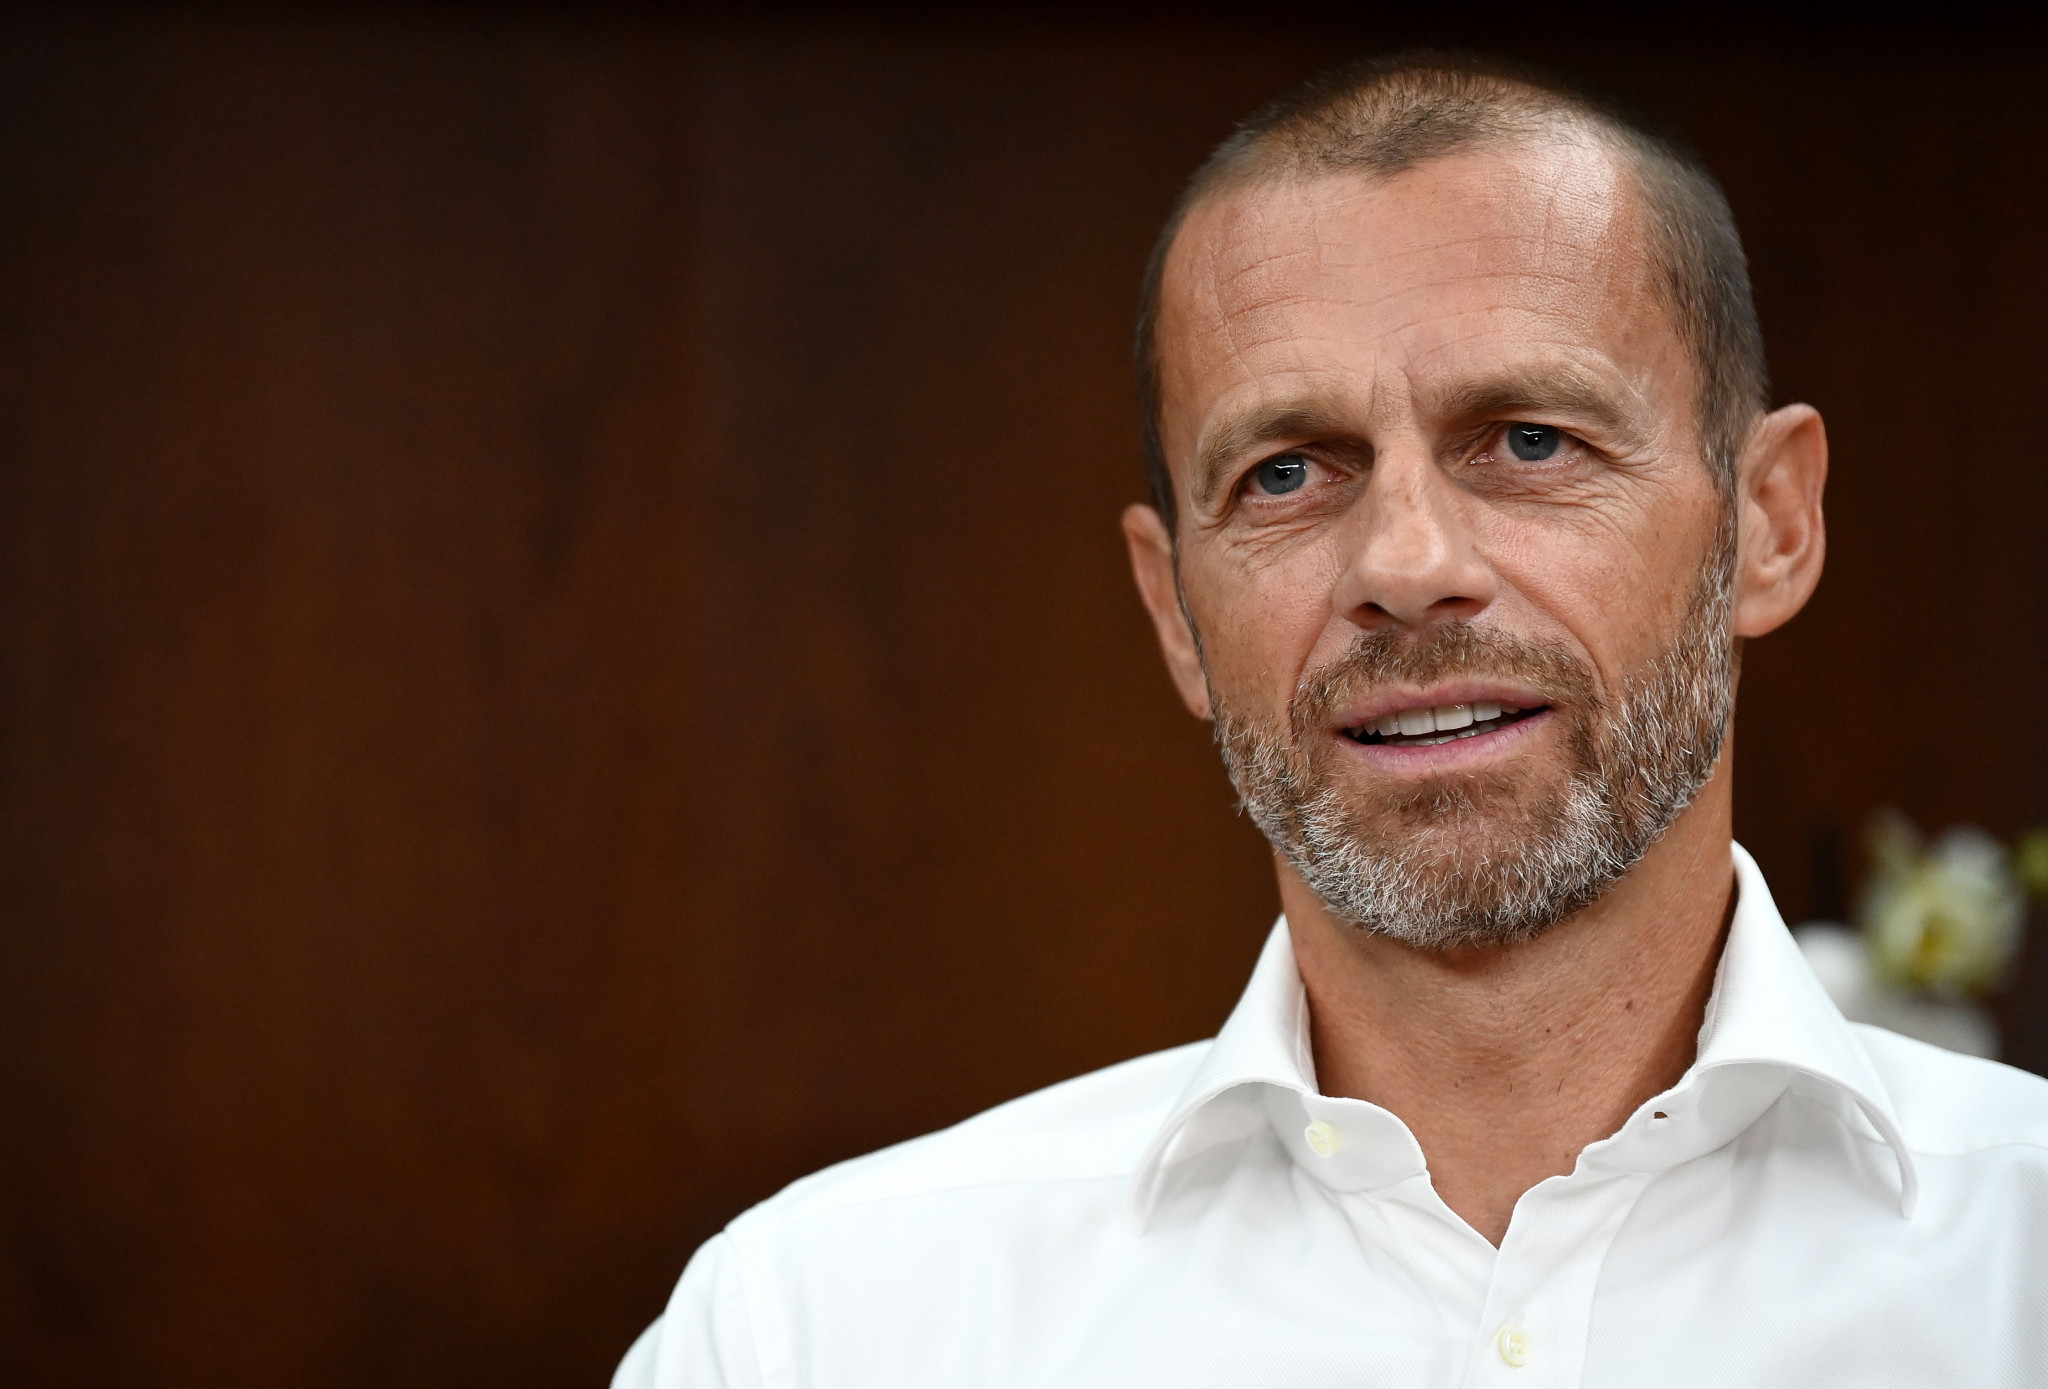 A furious UEFA President Aleksander Čeferin hit out at The Super League today, calling it 